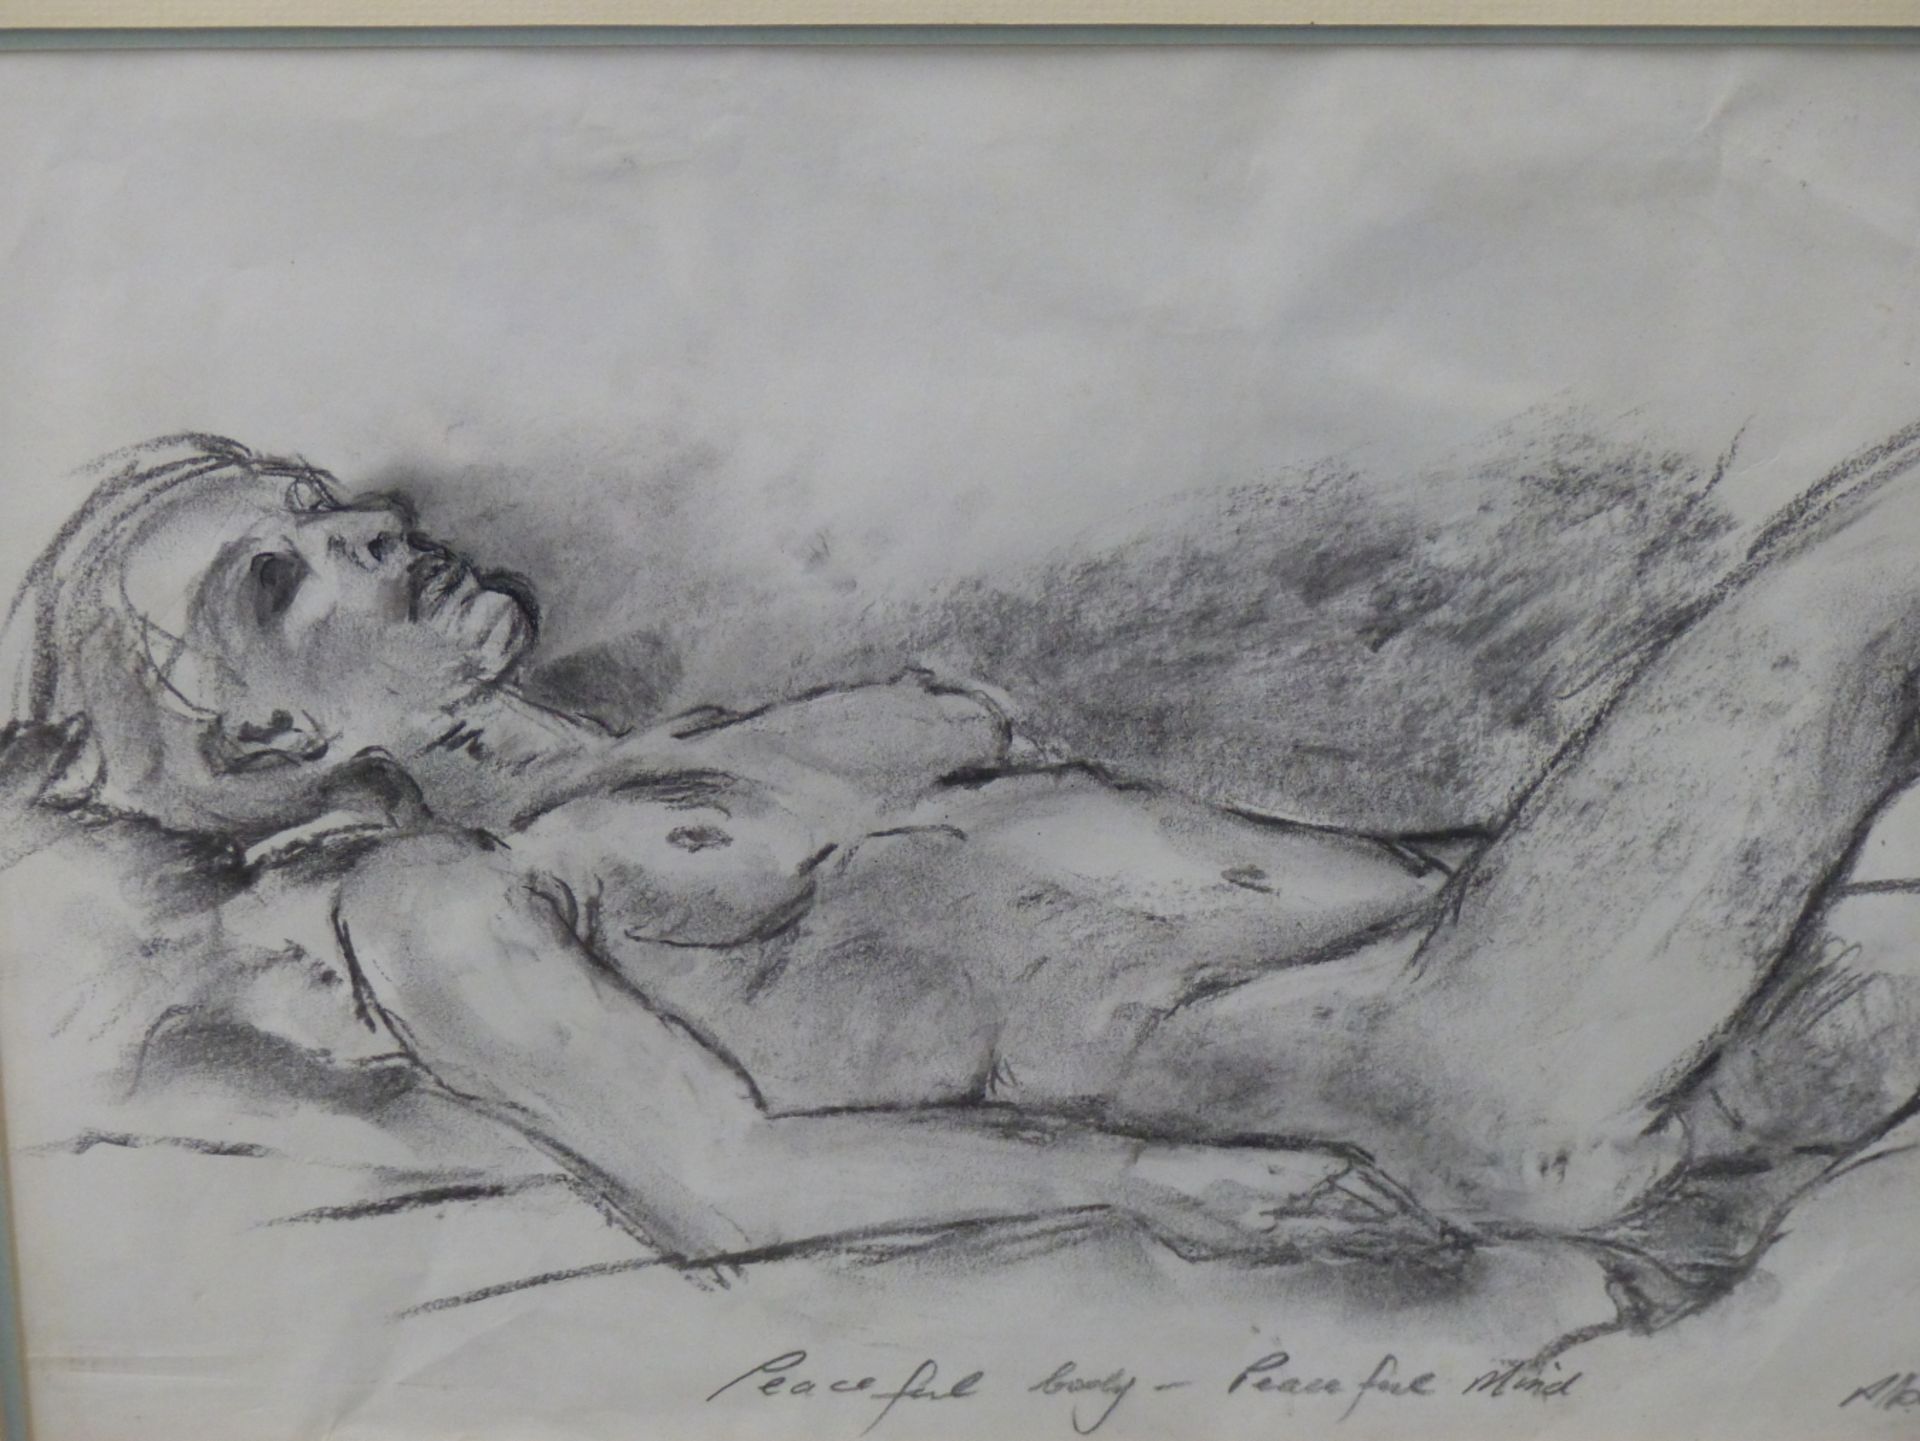 CONTEMPORARY 20TH C. A RECUMBANT NUDE SKETCH ENTITLED "PEACFUL BODY-PEACFUL MIND". GRAPHITE ON - Image 3 of 6